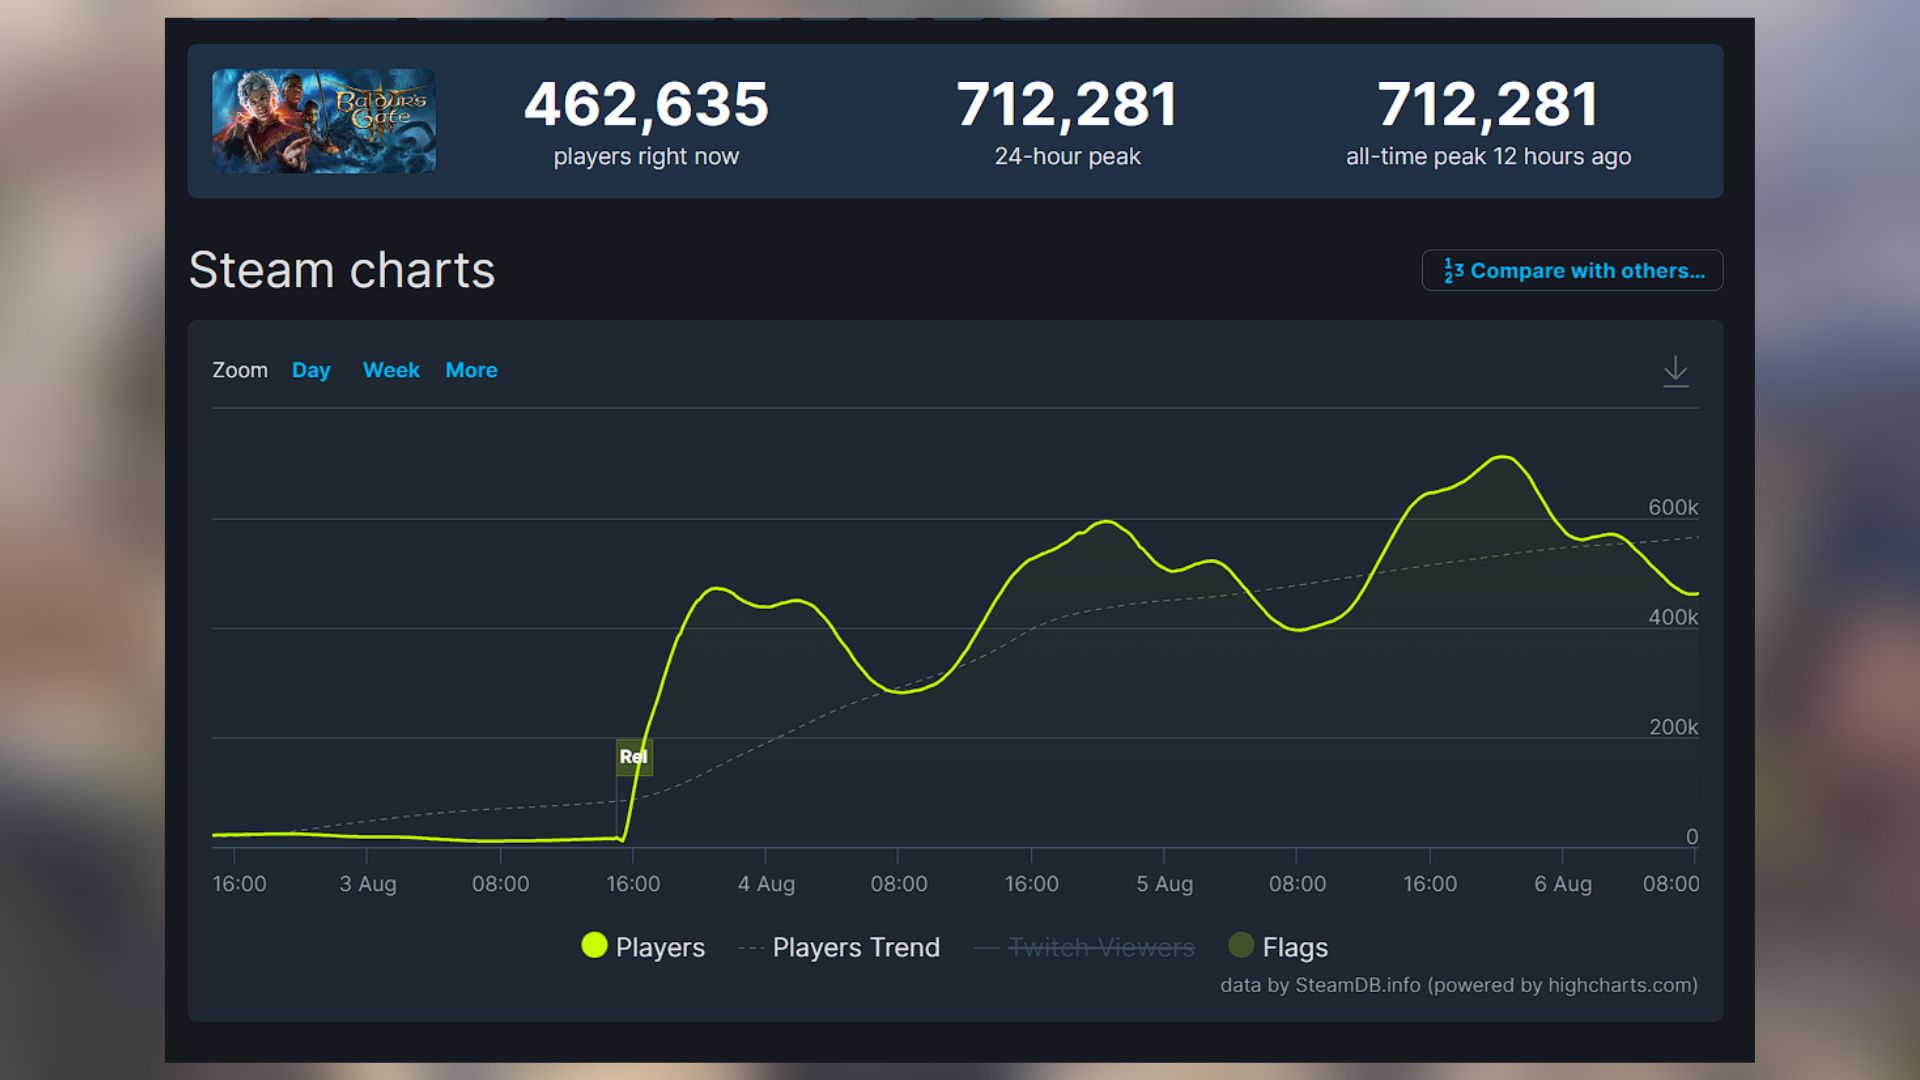 Steam Charts · Most Played Games on Steam · SteamDB